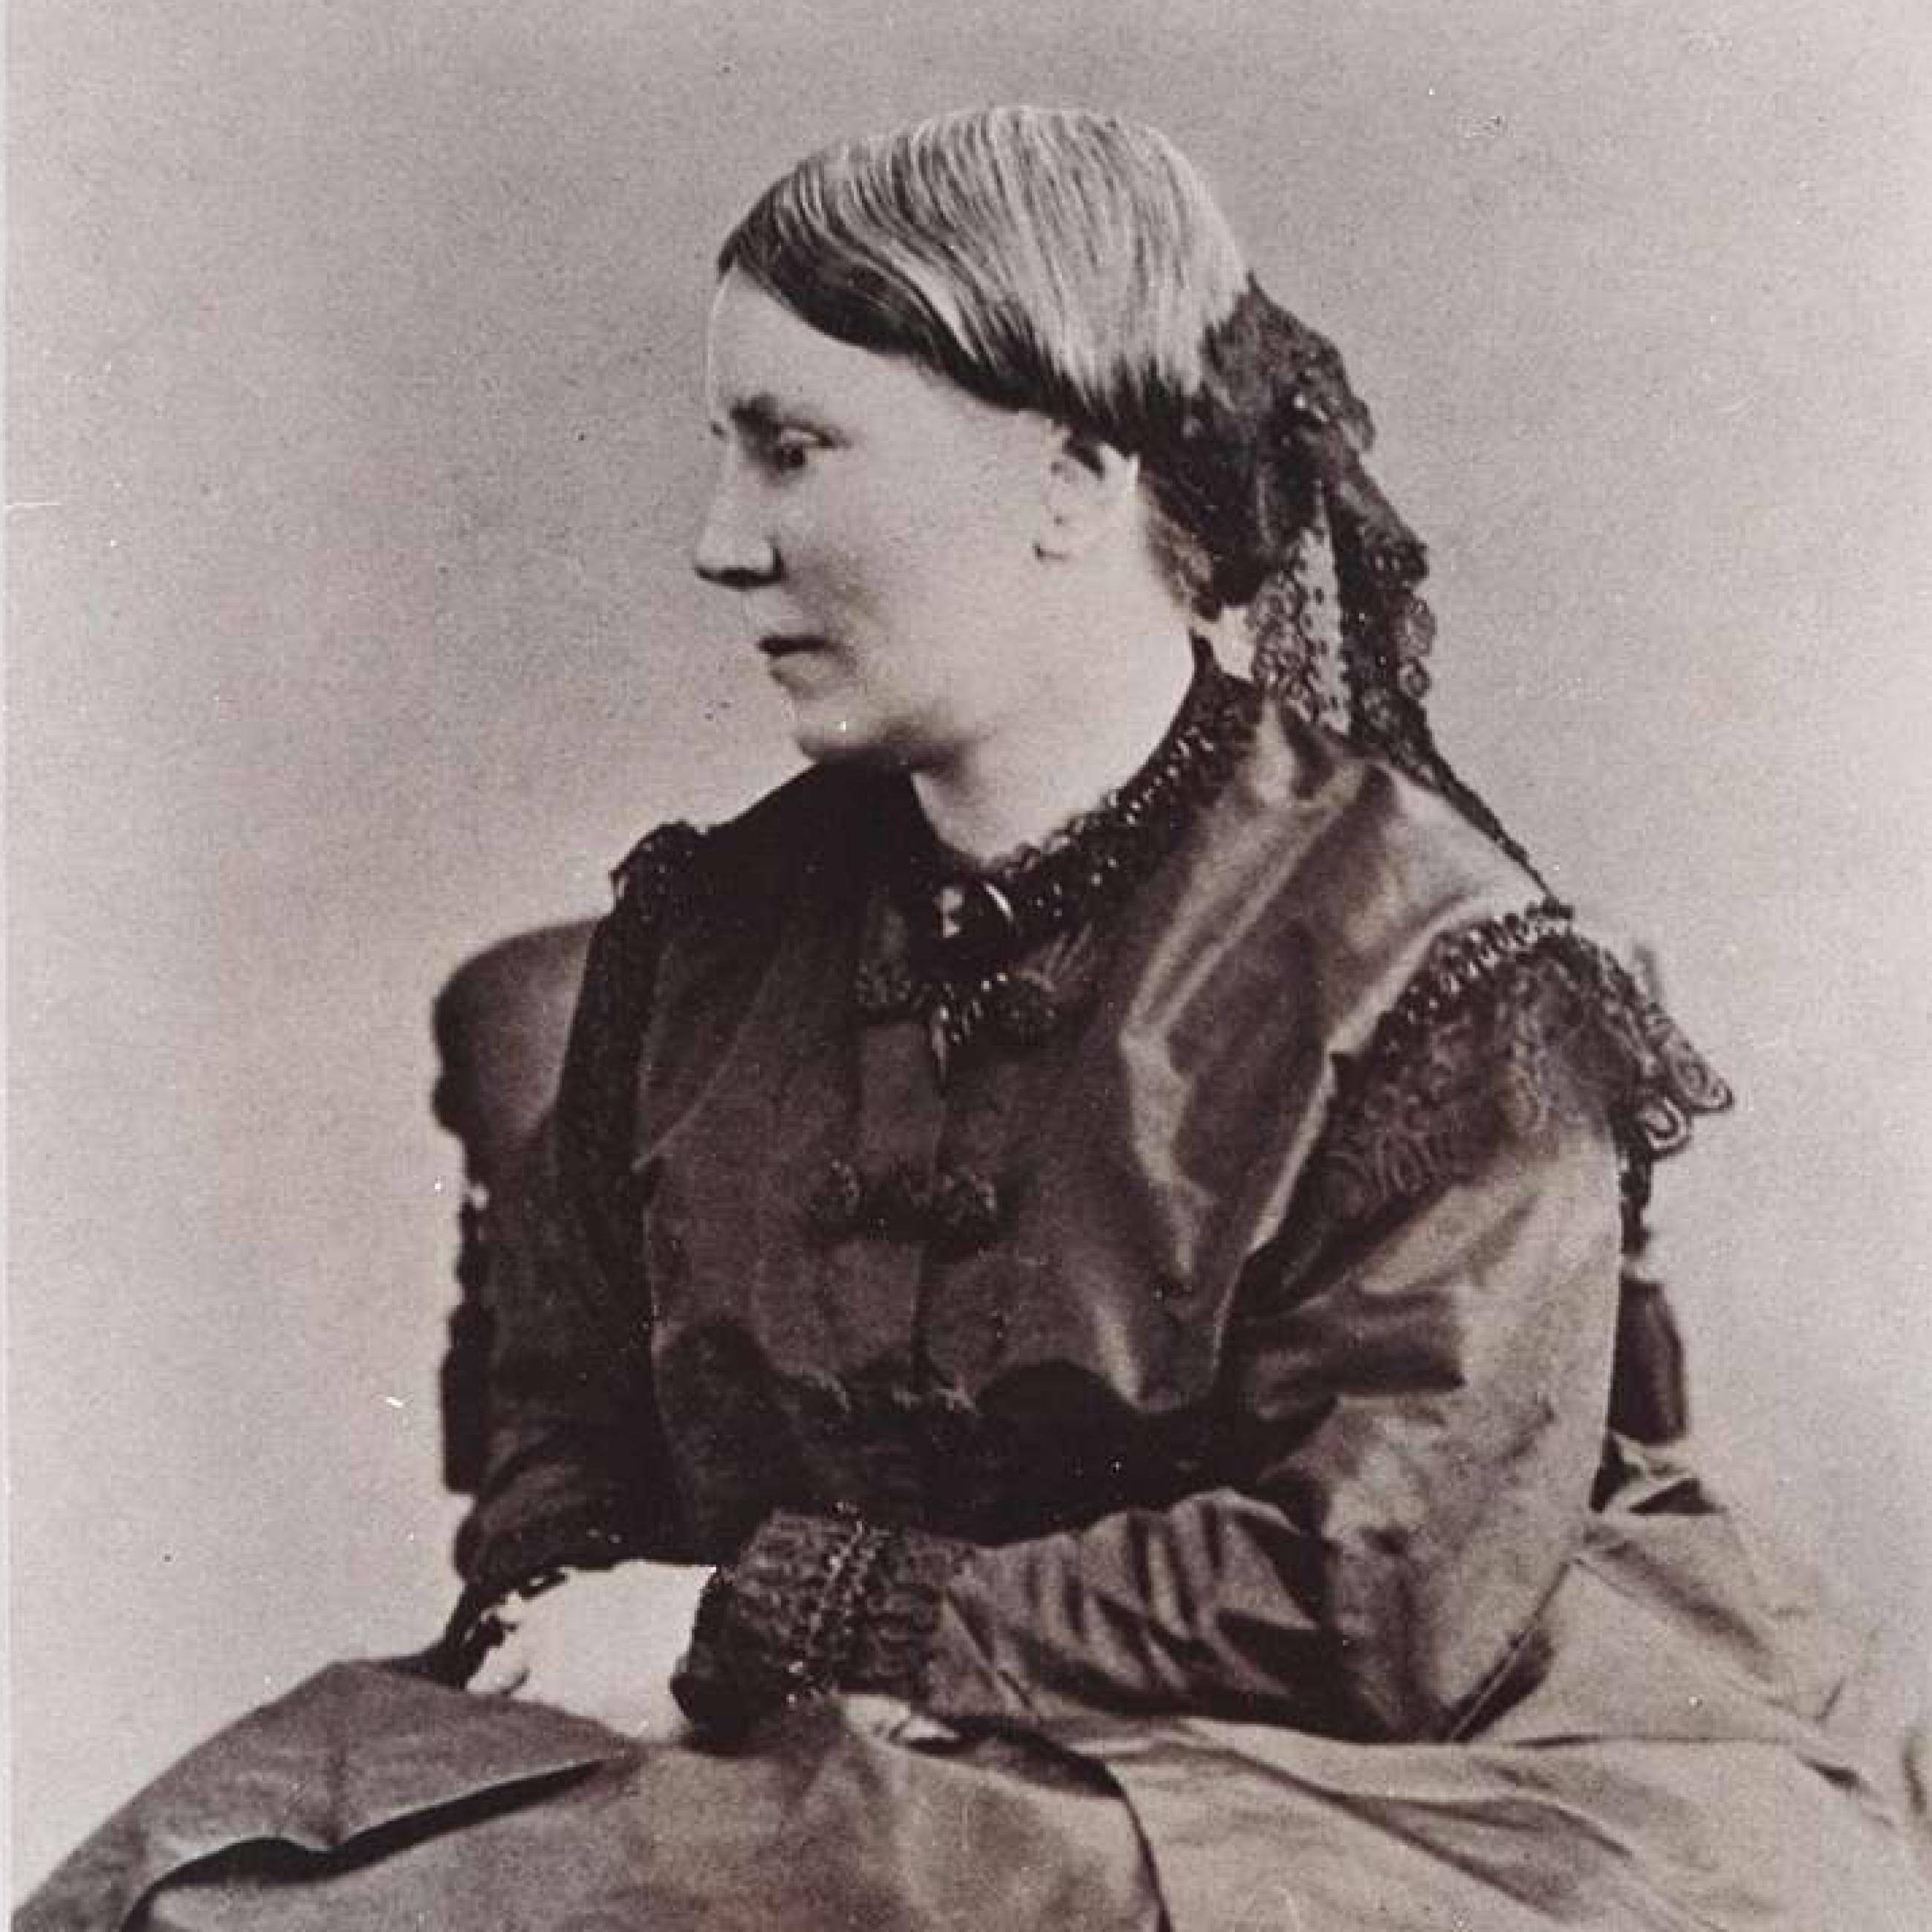 Portrait of Elizabeth Blackwell, a white woman in a black dress with fair hair seated in profile, ca. 1850–60.